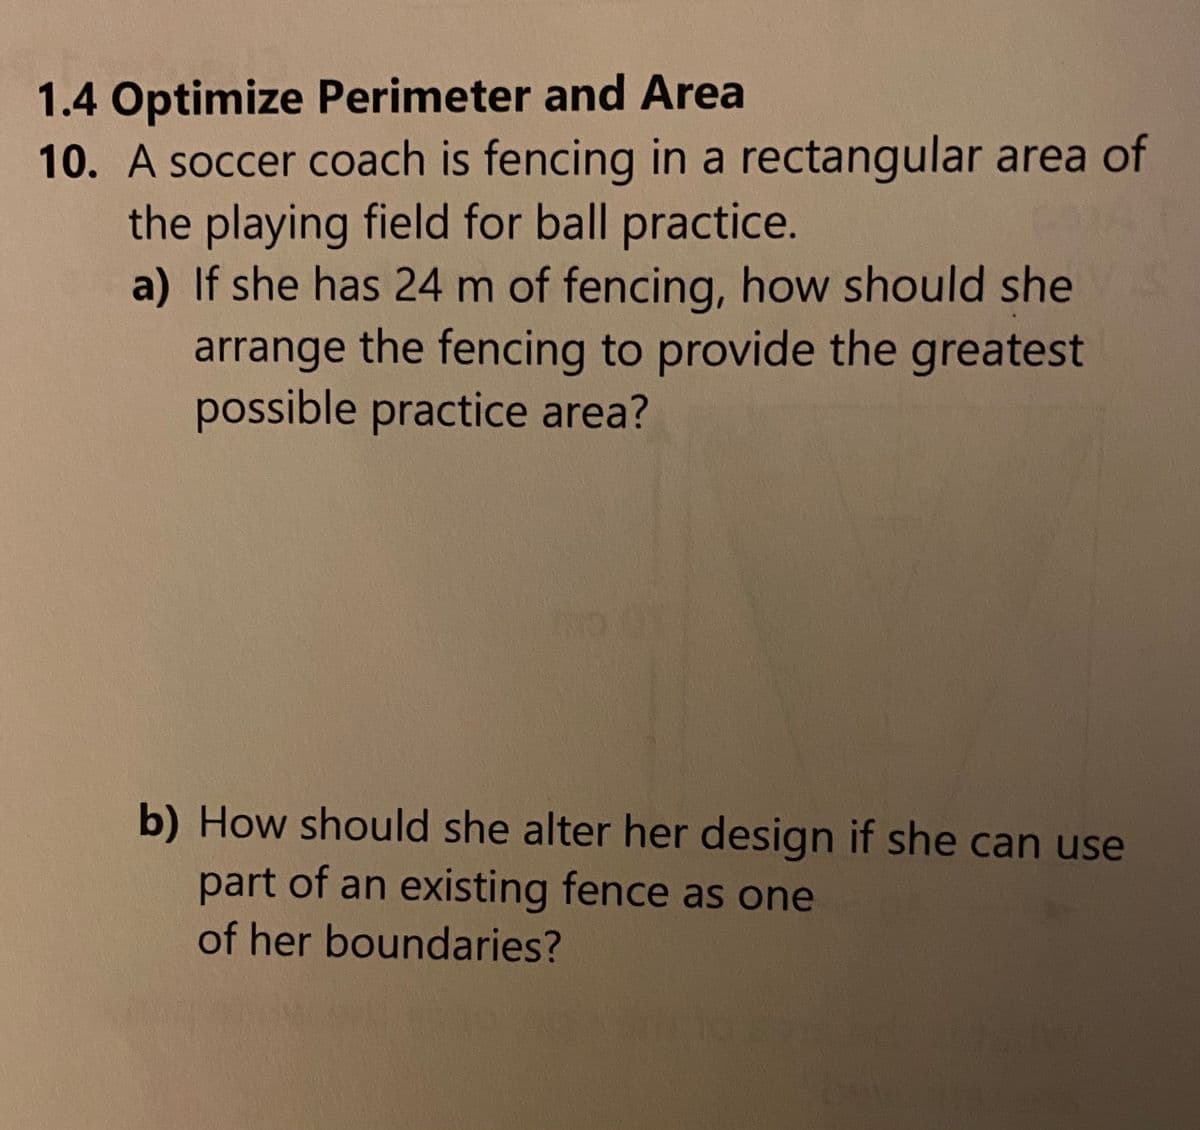 1.4 Optimize Perimeter and Area
10. A soccer coach is fencing in a rectangular area of
the playing field for ball practice.
a) If she has 24 m of fencing, how should she
arrange the fencing to provide the greatest
possible practice area?
b) How should she alter her design if she can use
part of an existing fence as one
of her boundaries?
